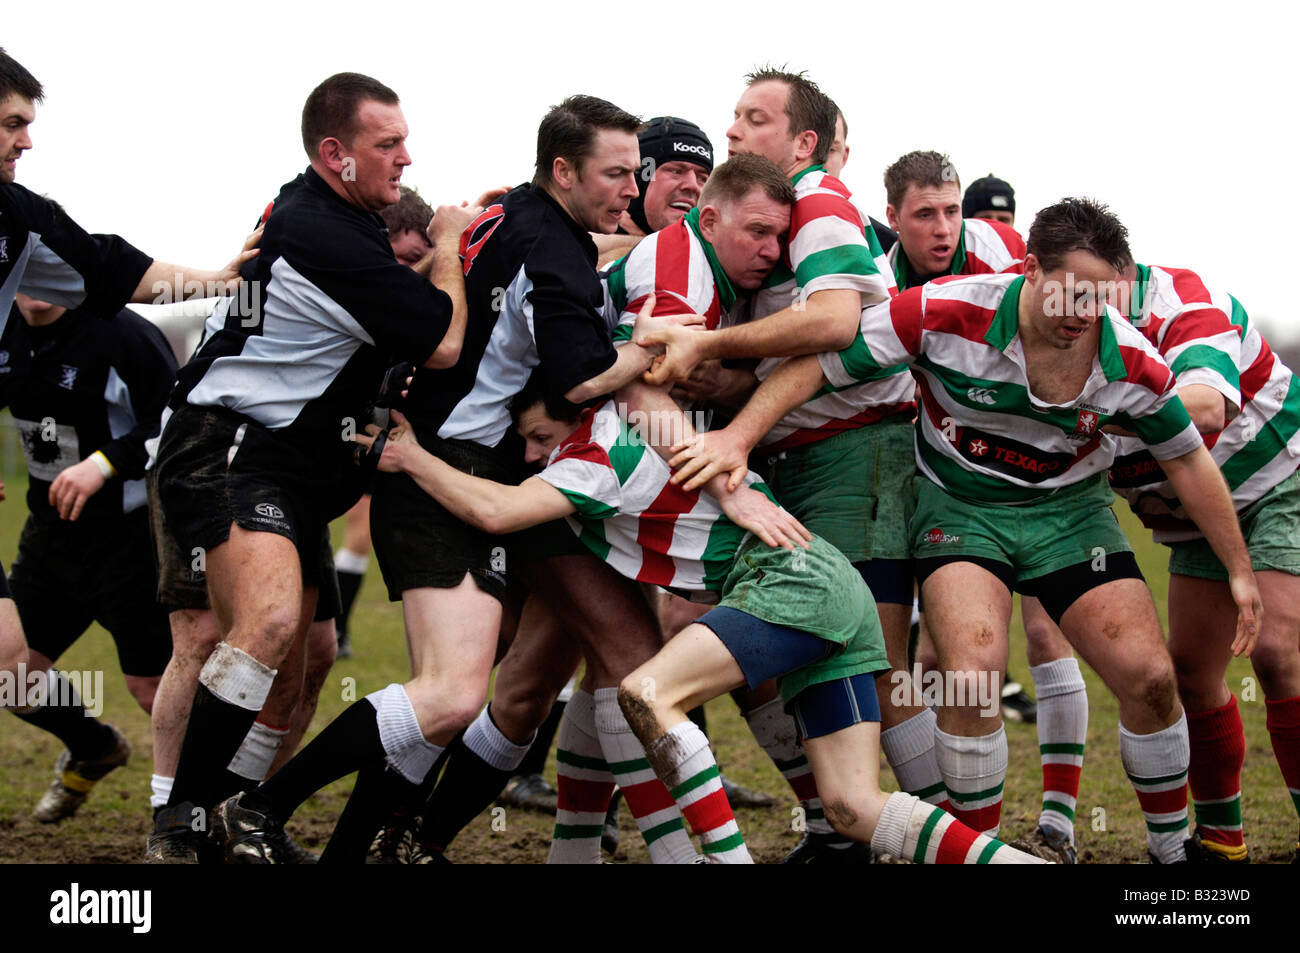 rugby action at broughton park  rugby club Stock Photo